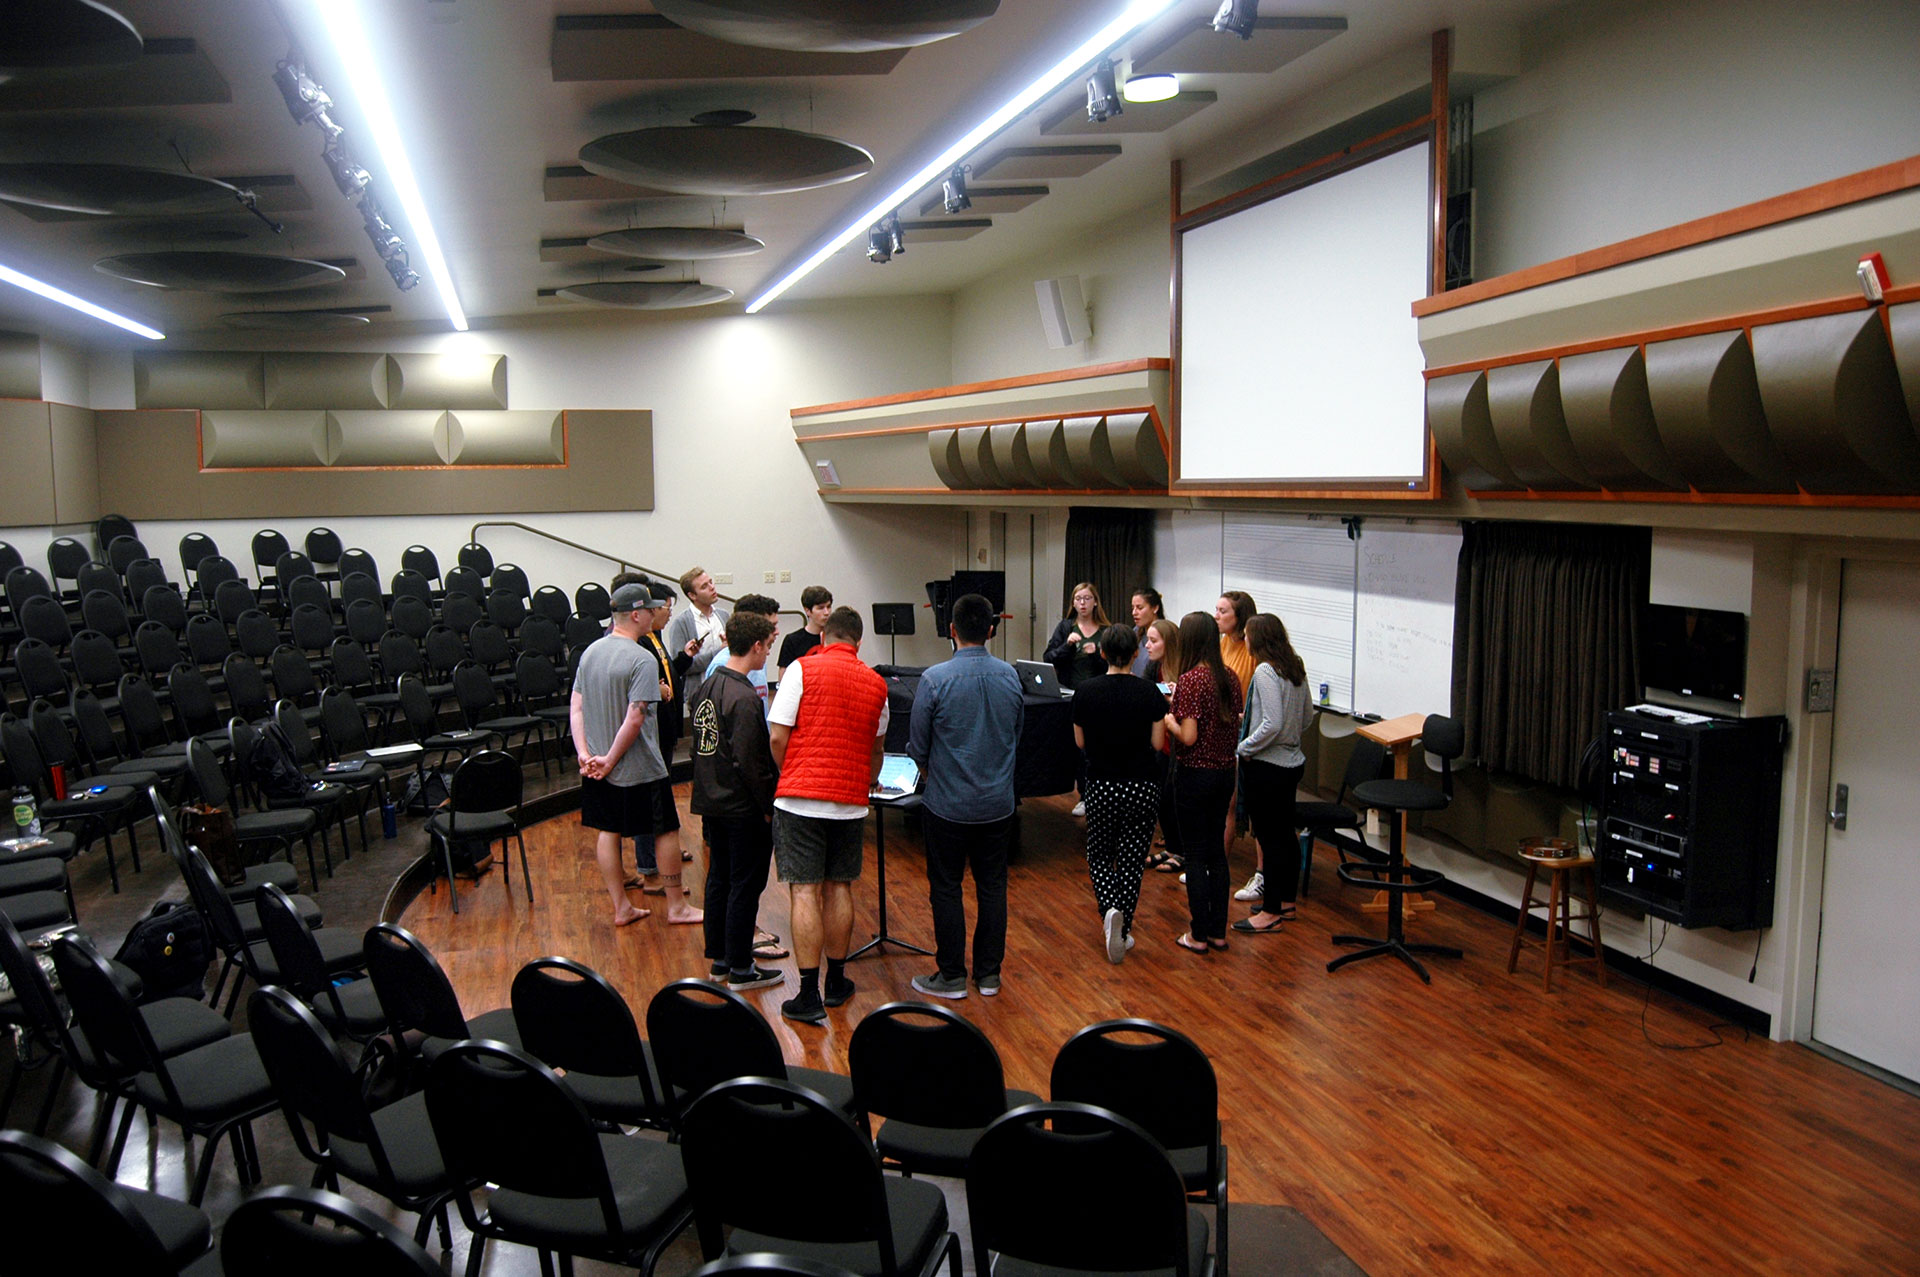 October 8, 2017 | San Luis Obispo, CA | All voice parts (soprano, alto, tenor, bass) reconvene
around the piano in room 218. They have rehearsed for three hours and are wrapping up by
running through their set list. Take It SLO will continue to work on their a cappella music for
their winter concert each Wednesday and Sunday night this quarter. As their vocals continue to
tune tightly to each others’, so will their musical and personal bonds.